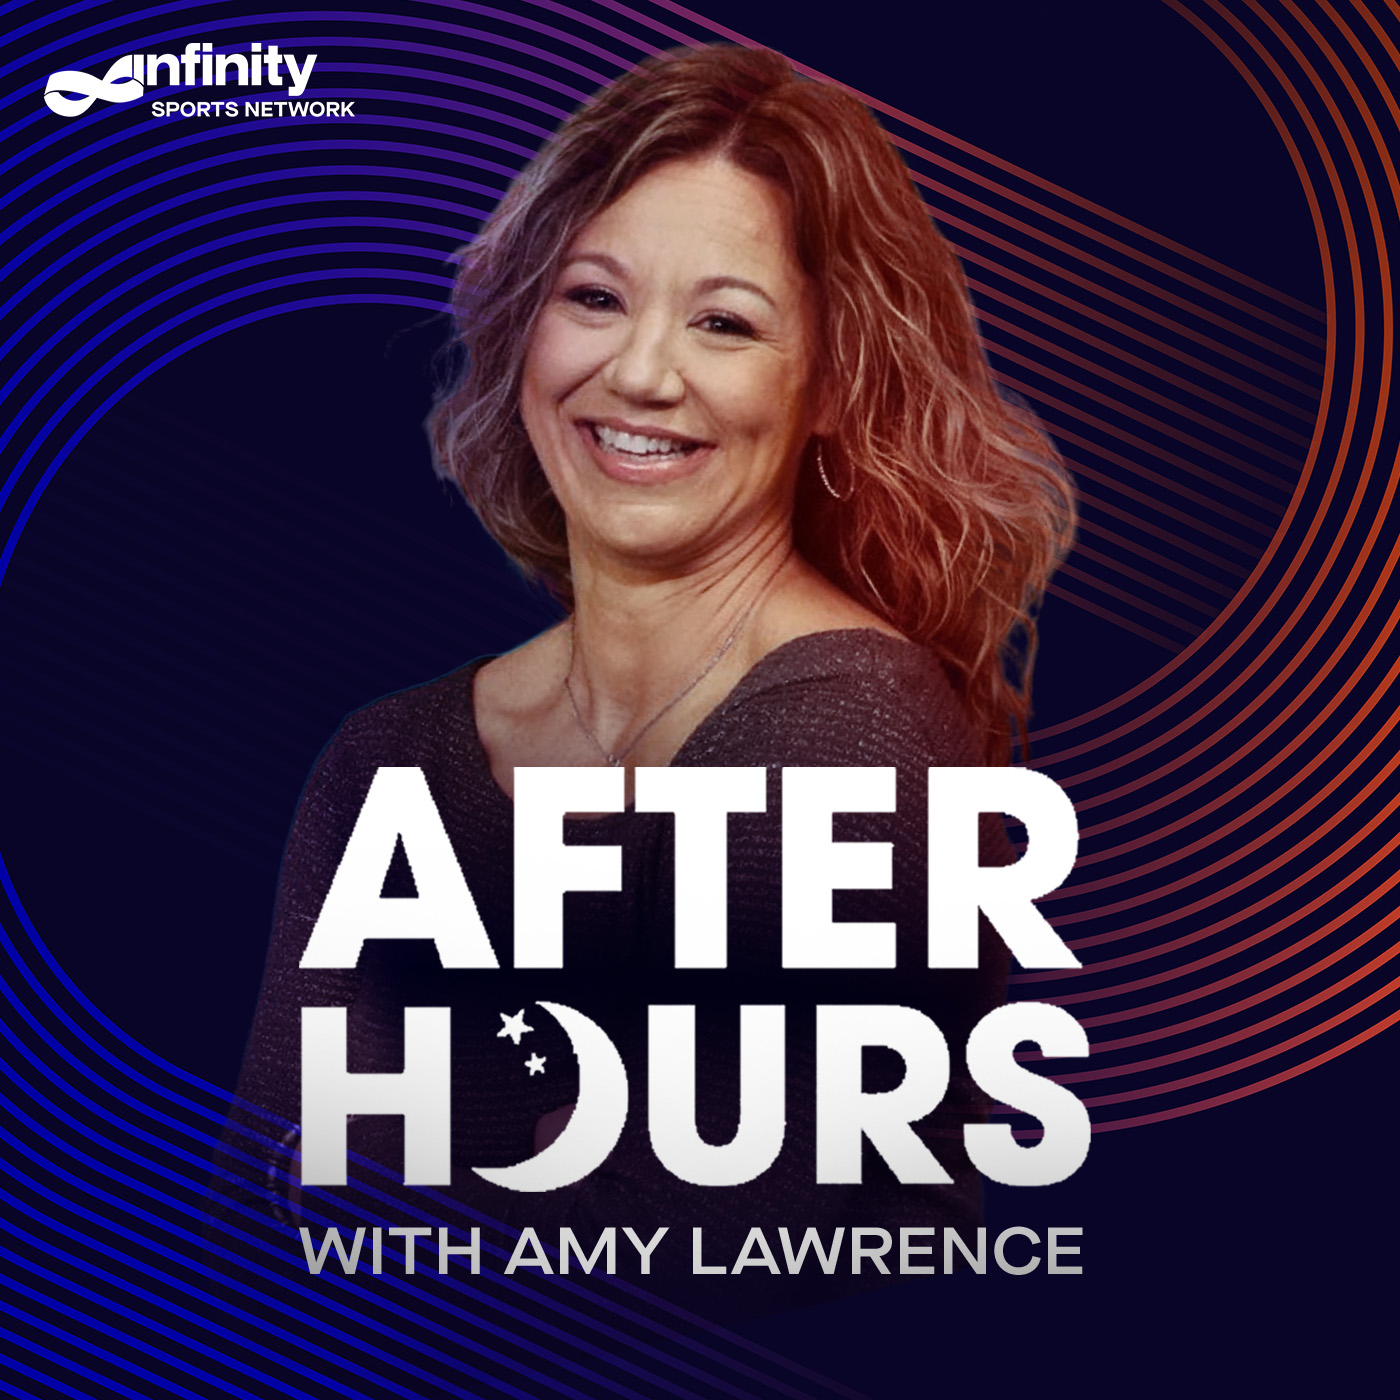 4-4-22 After Hours with Amy Lawrence PODCAST: Hour 3